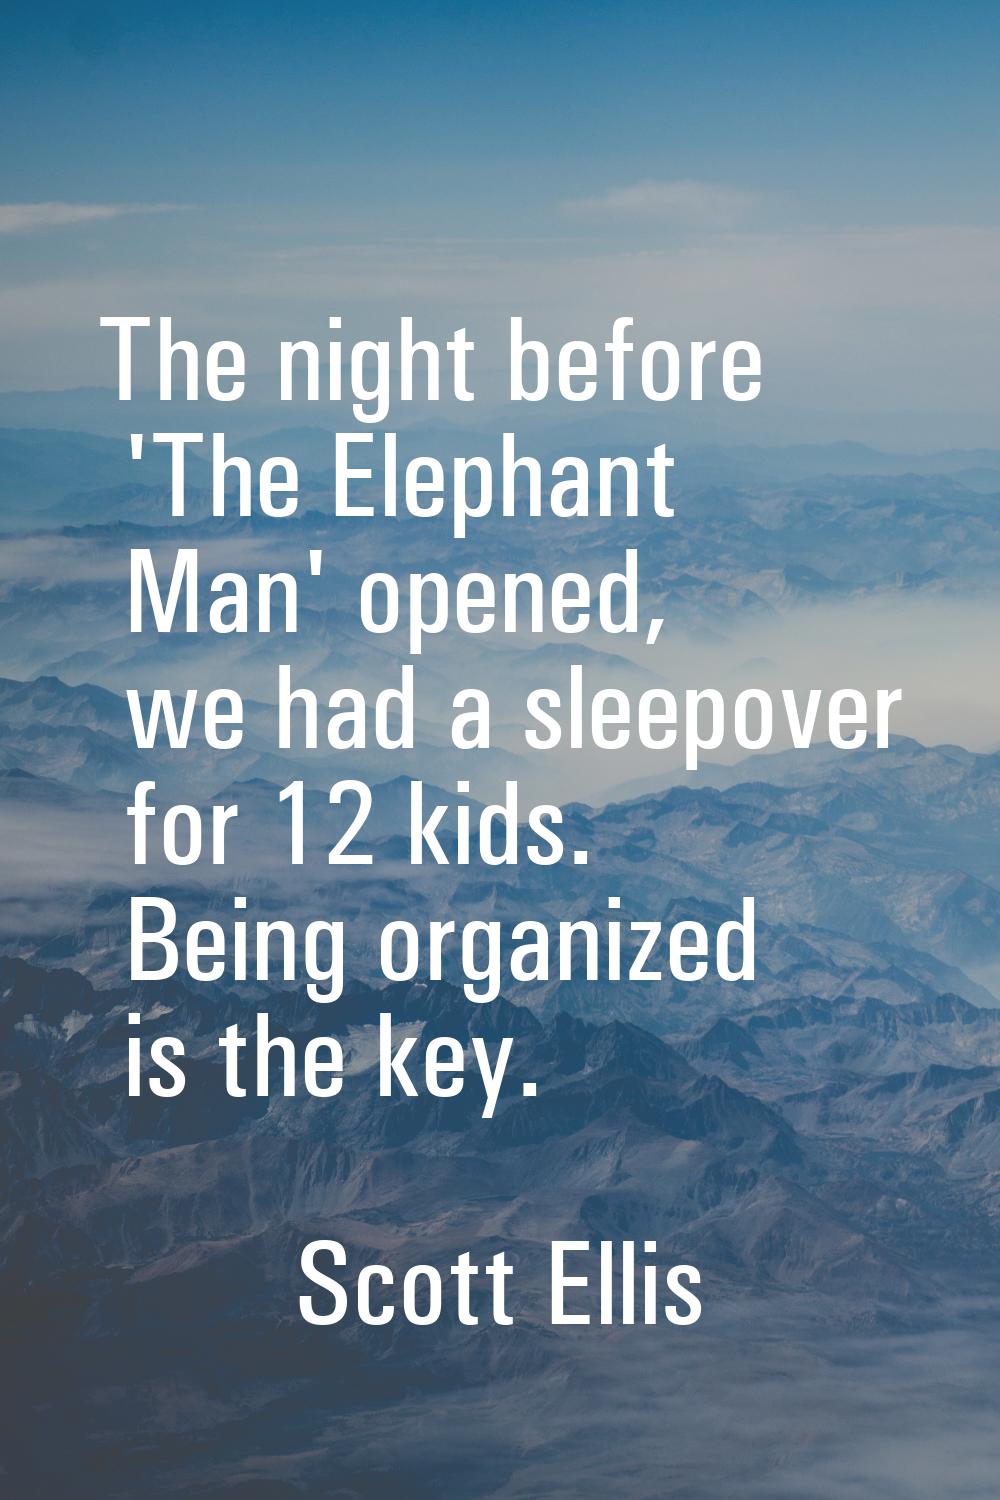 The night before 'The Elephant Man' opened, we had a sleepover for 12 kids. Being organized is the 